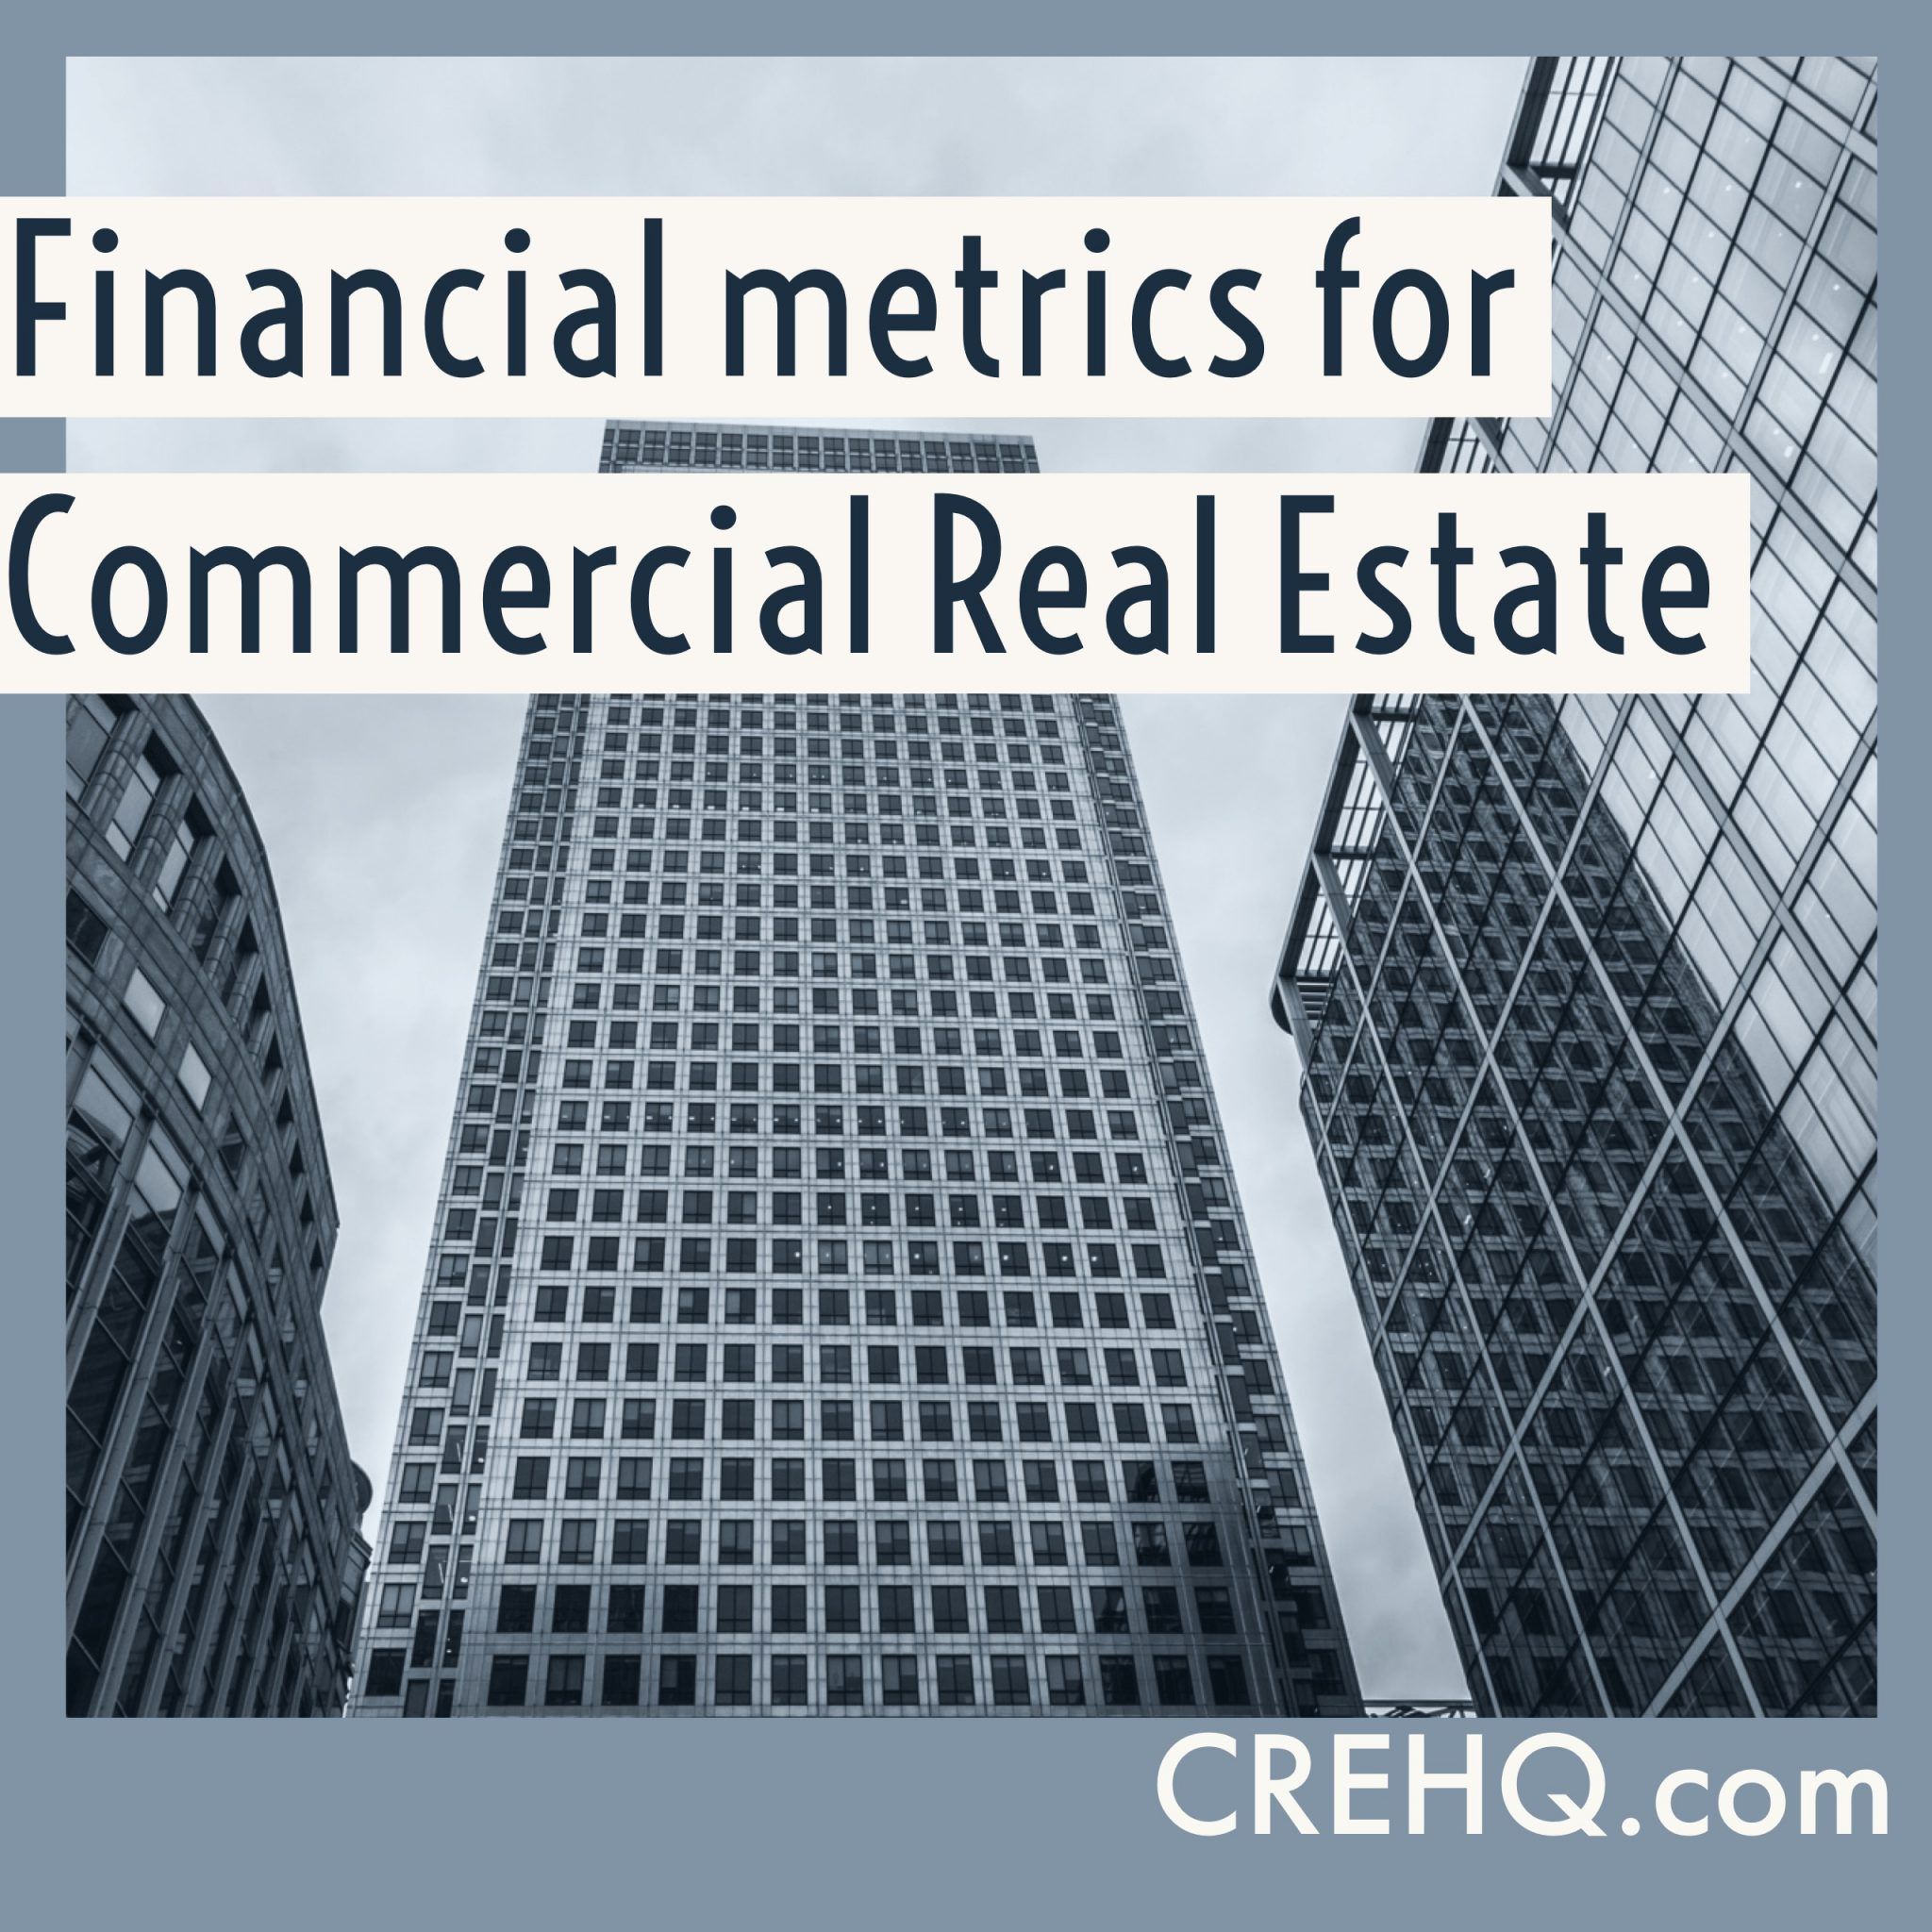 What percentage of commerical real estate is free and clear